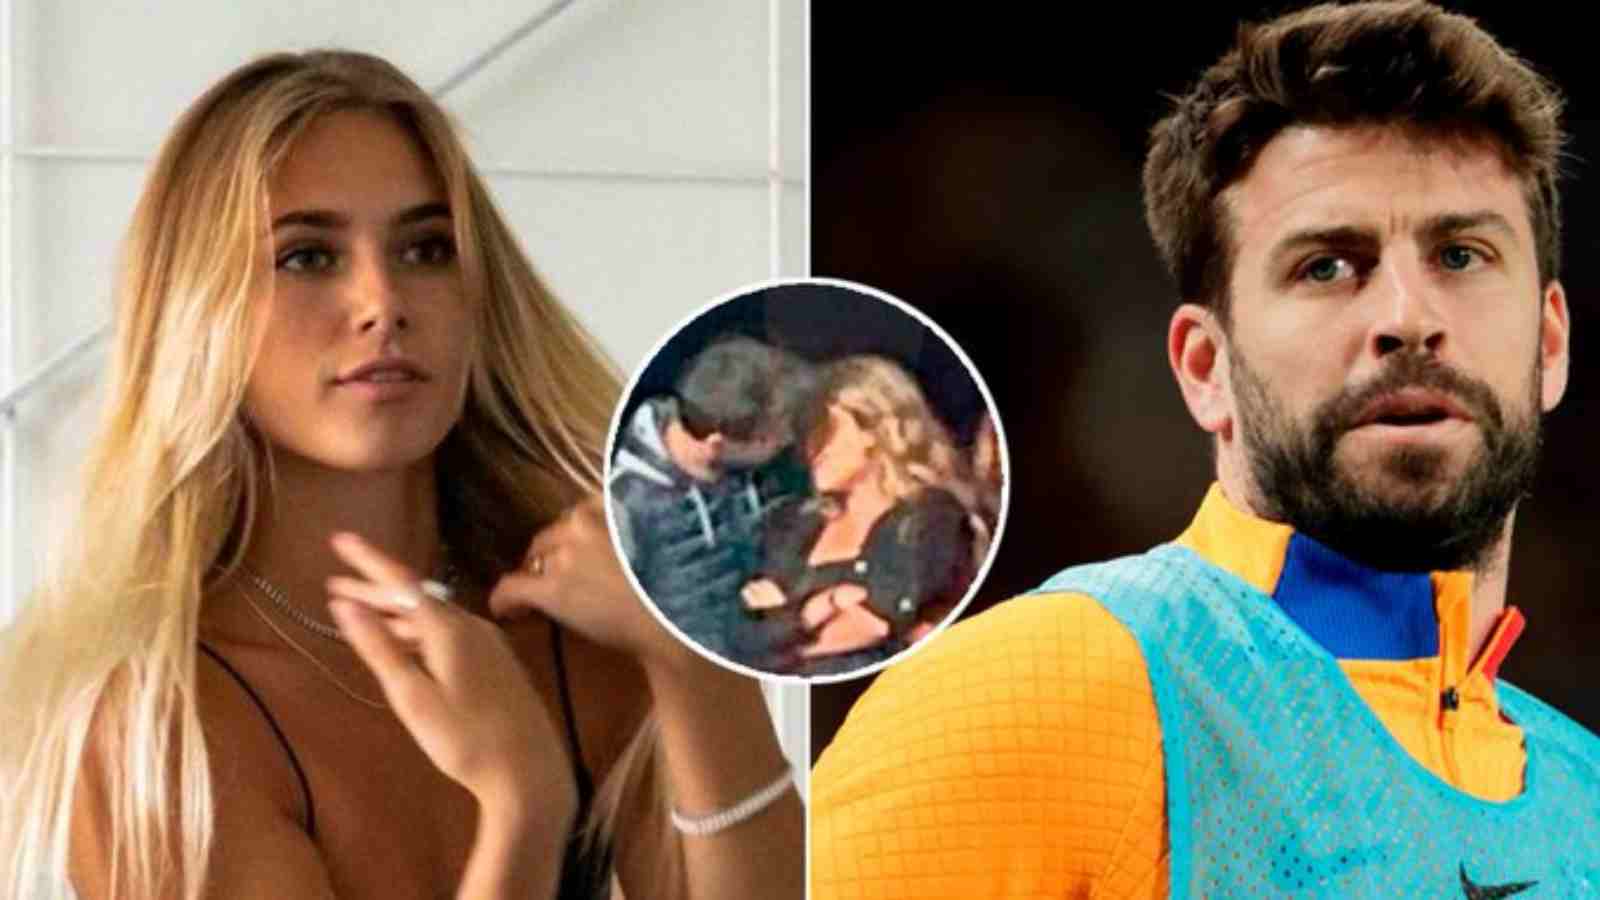 Gerard Pique Makes His Relationship With Clara Chia Marti Official After Bitter Breakup With Shakira - First Curiosity